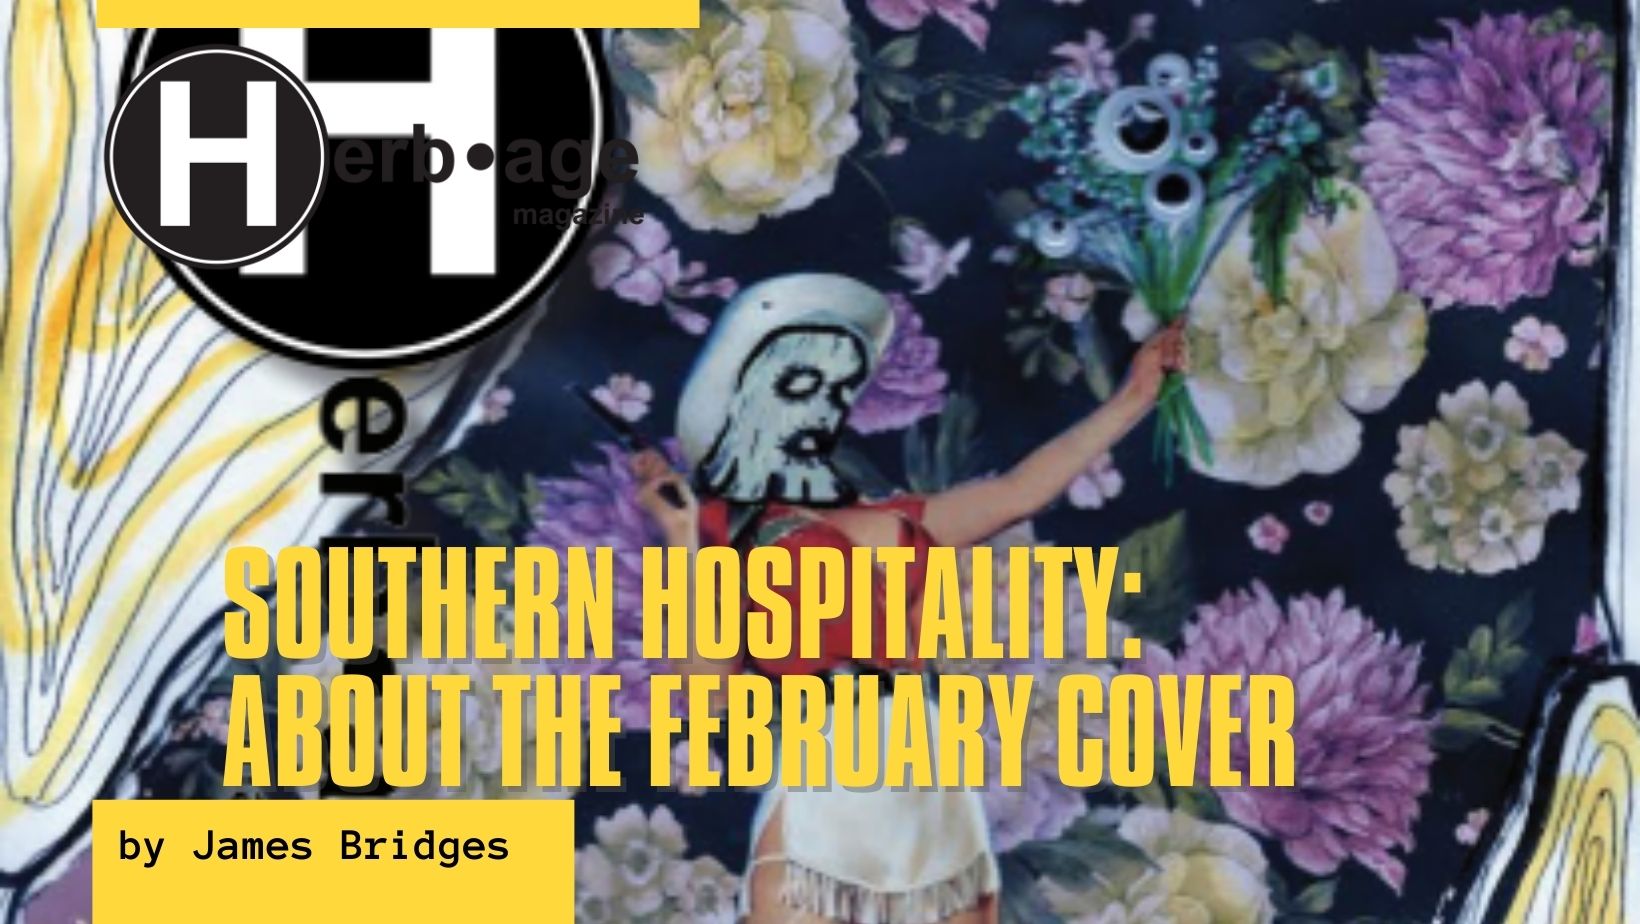 Southern Hospitality: About The February Cover